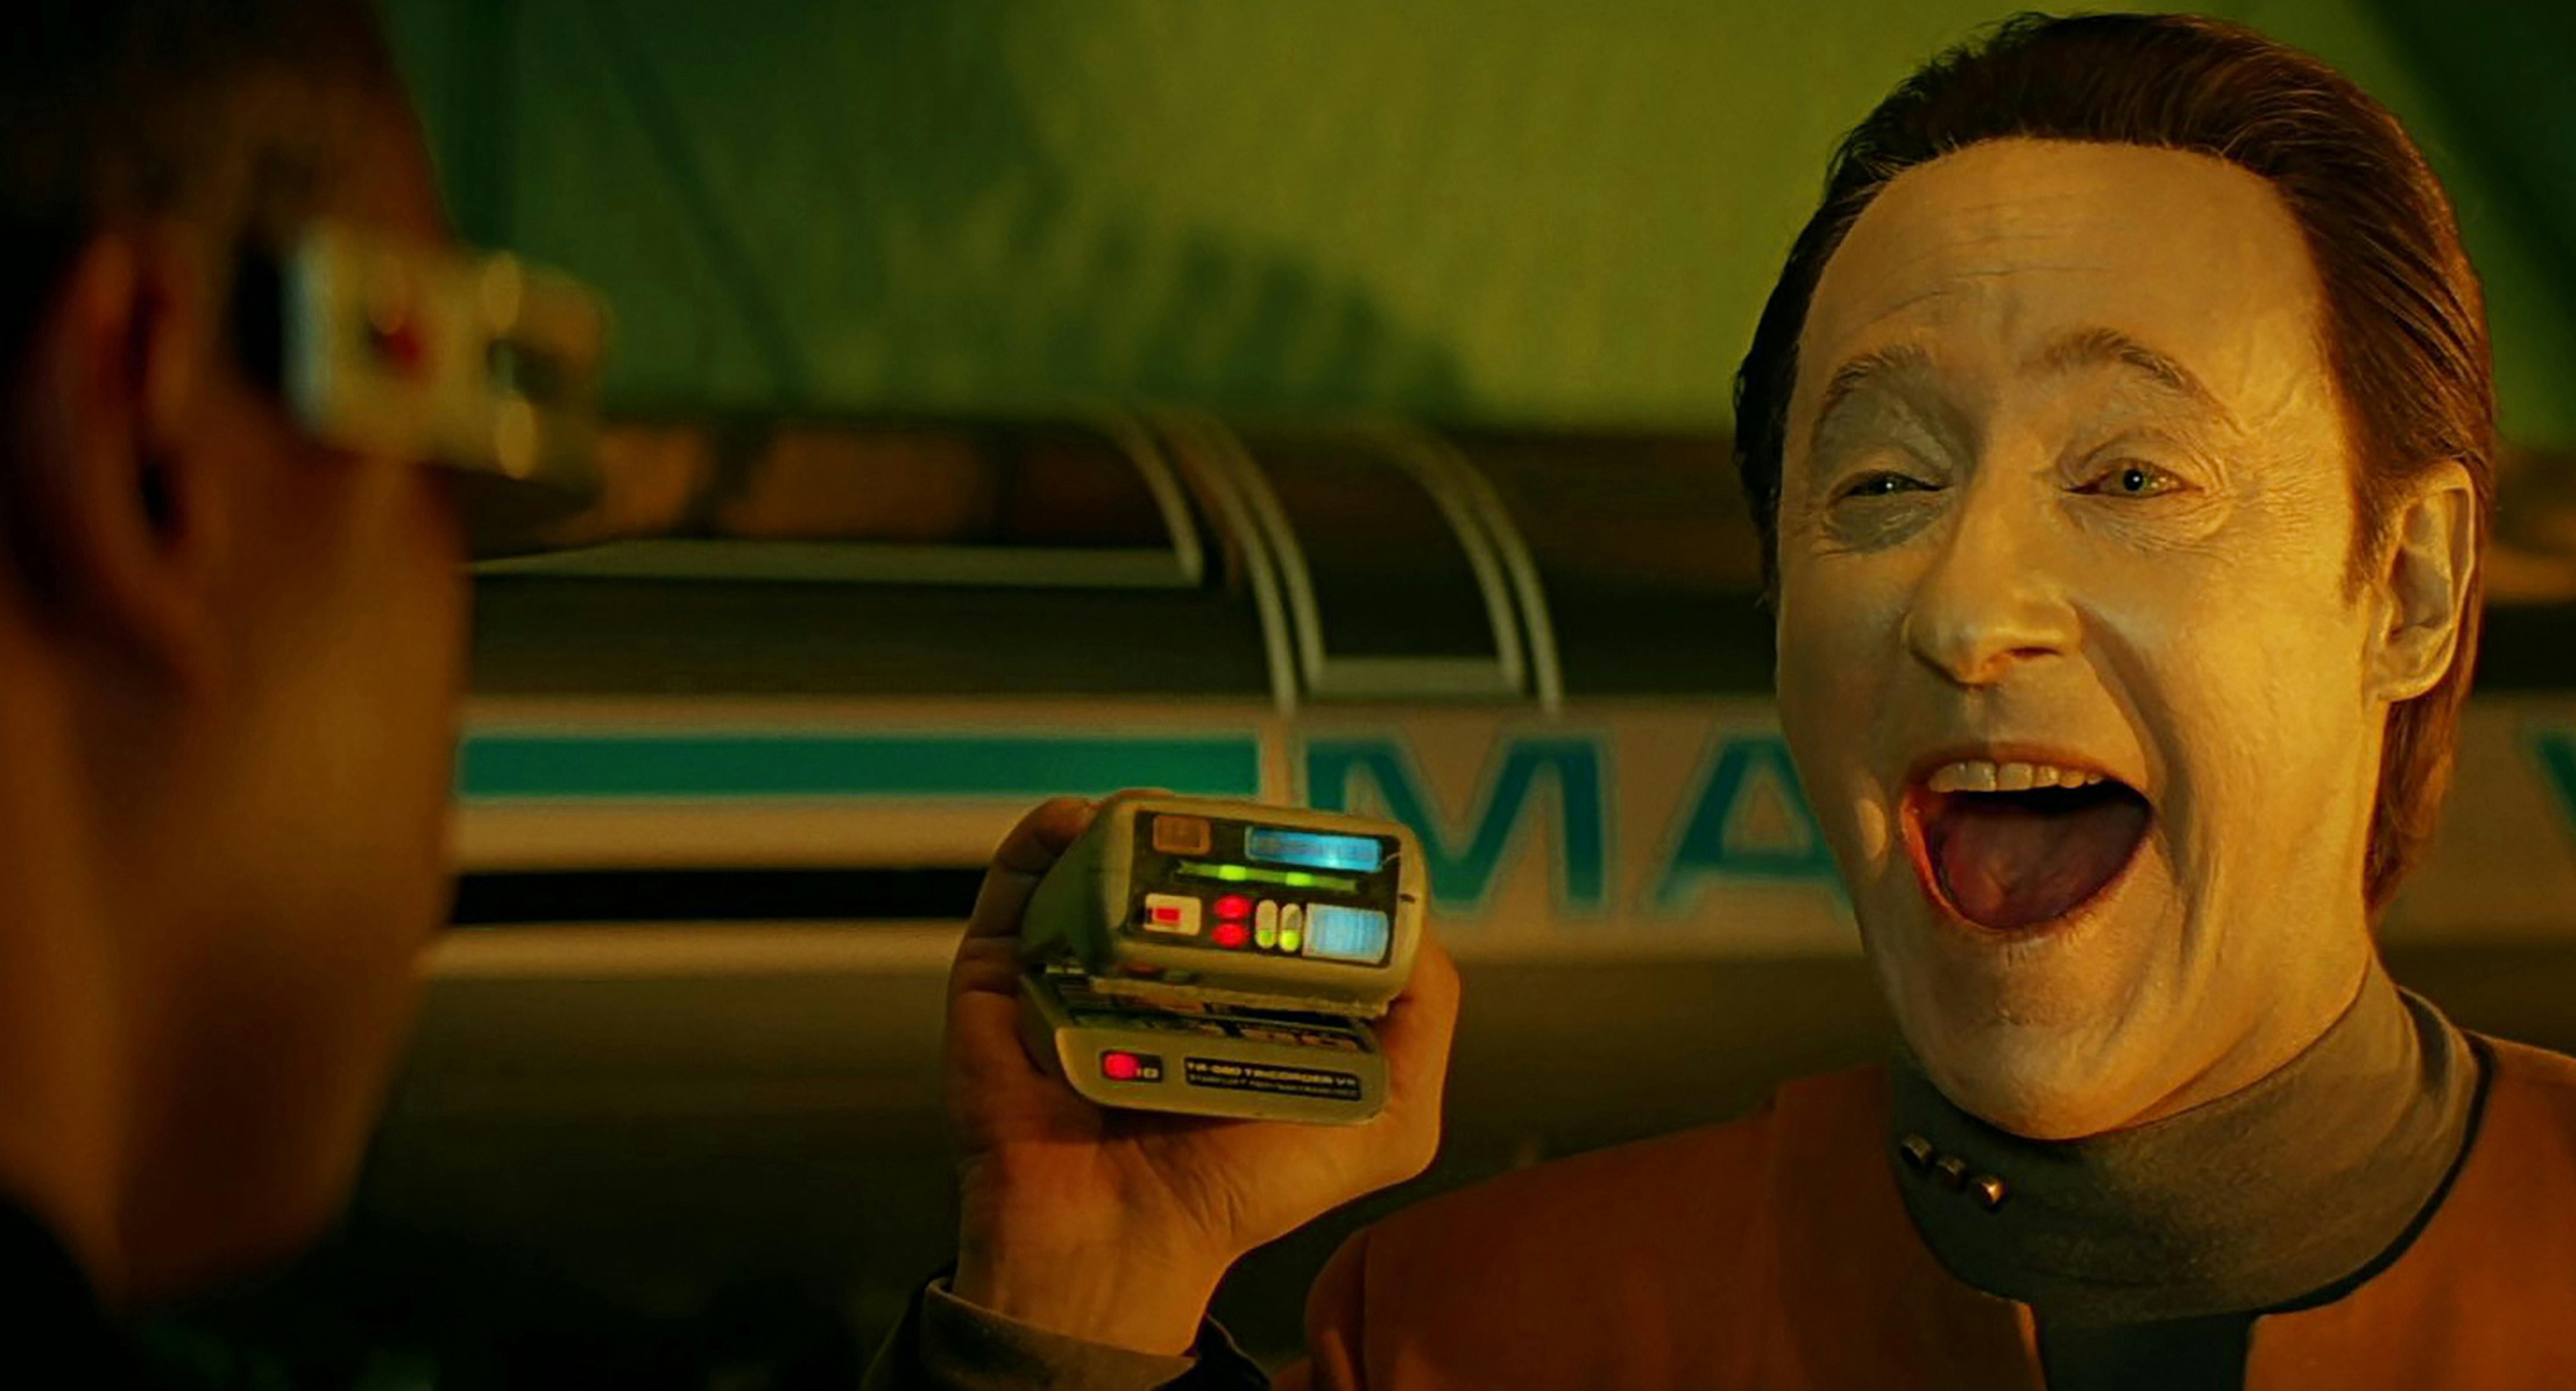 Data open mouth smiles at Geordi La Forge